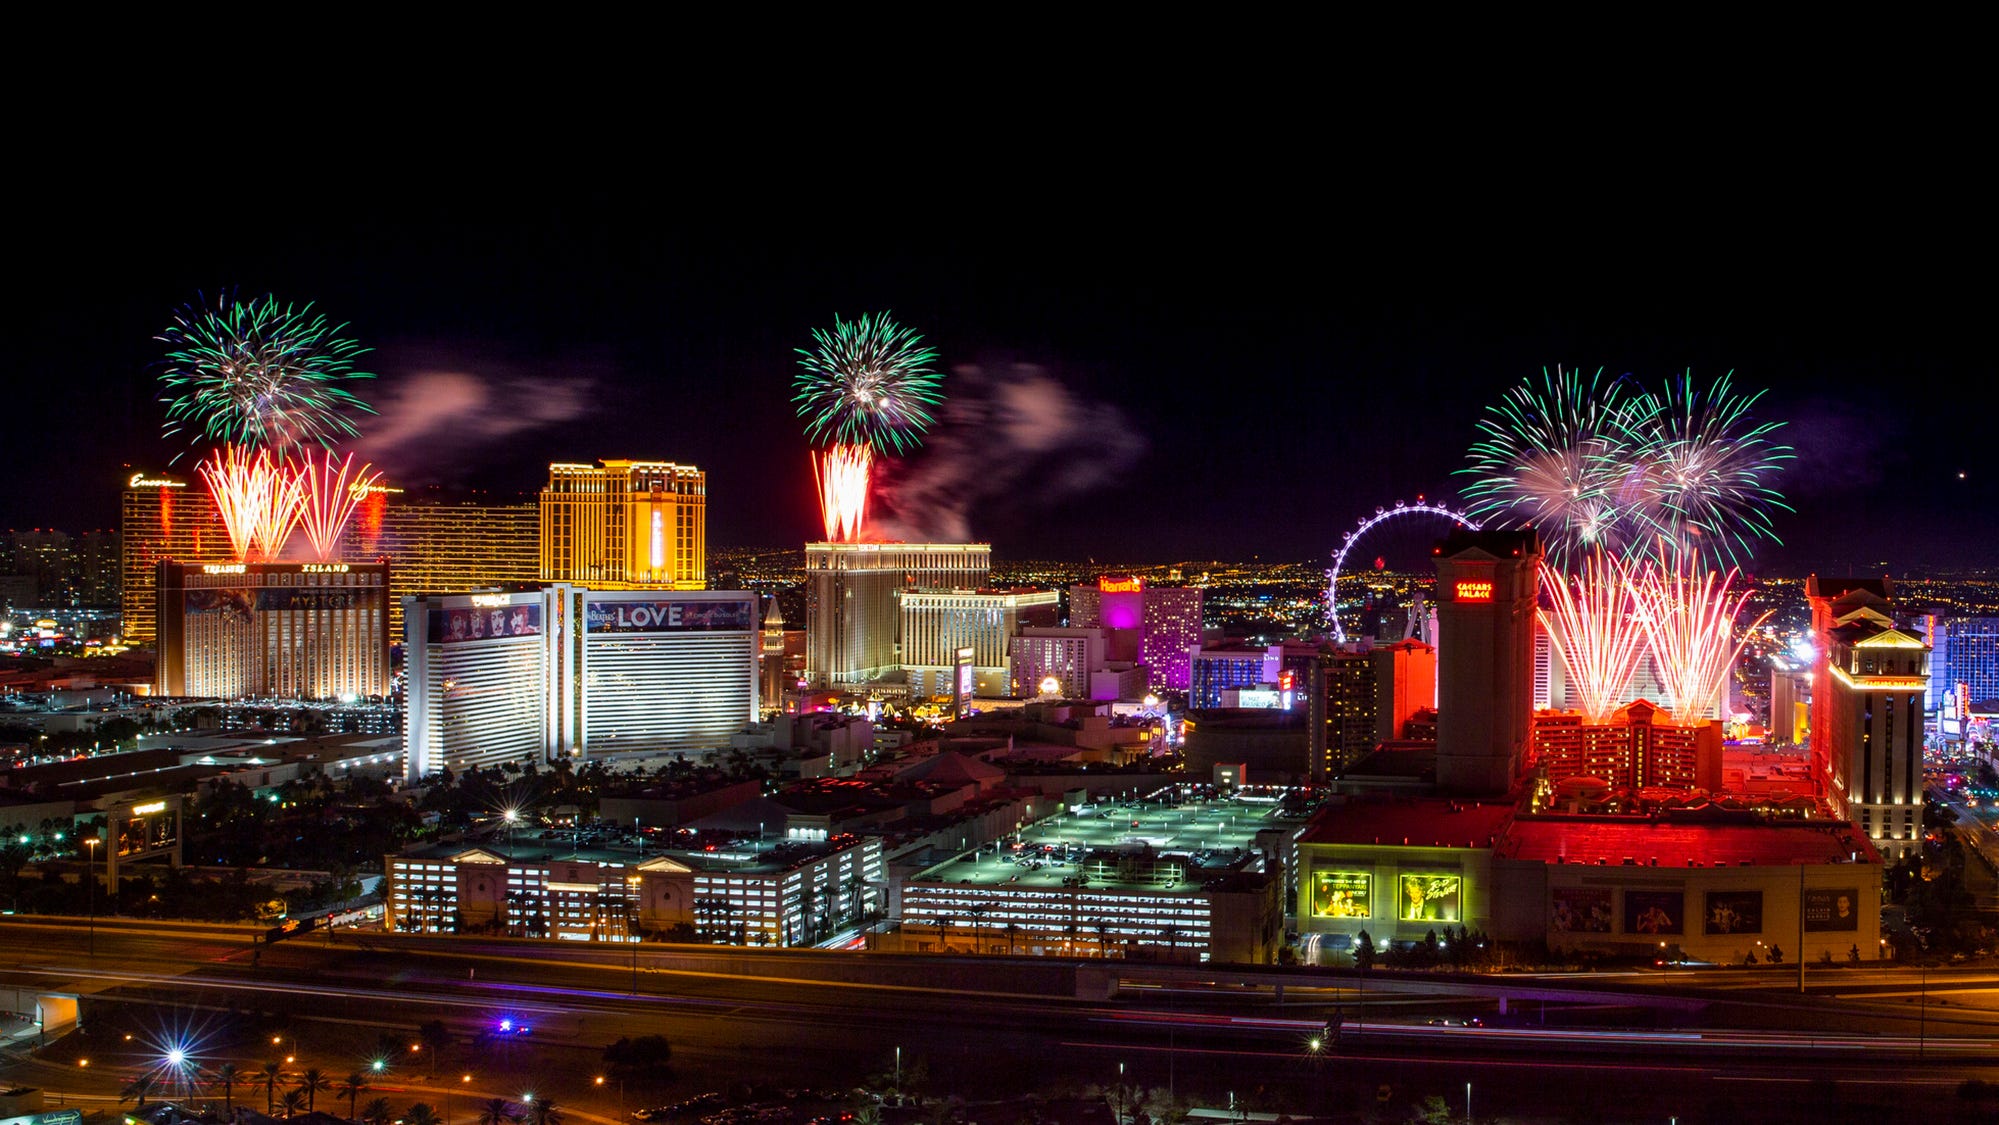 Officials Las Vegas fireworks show will go on